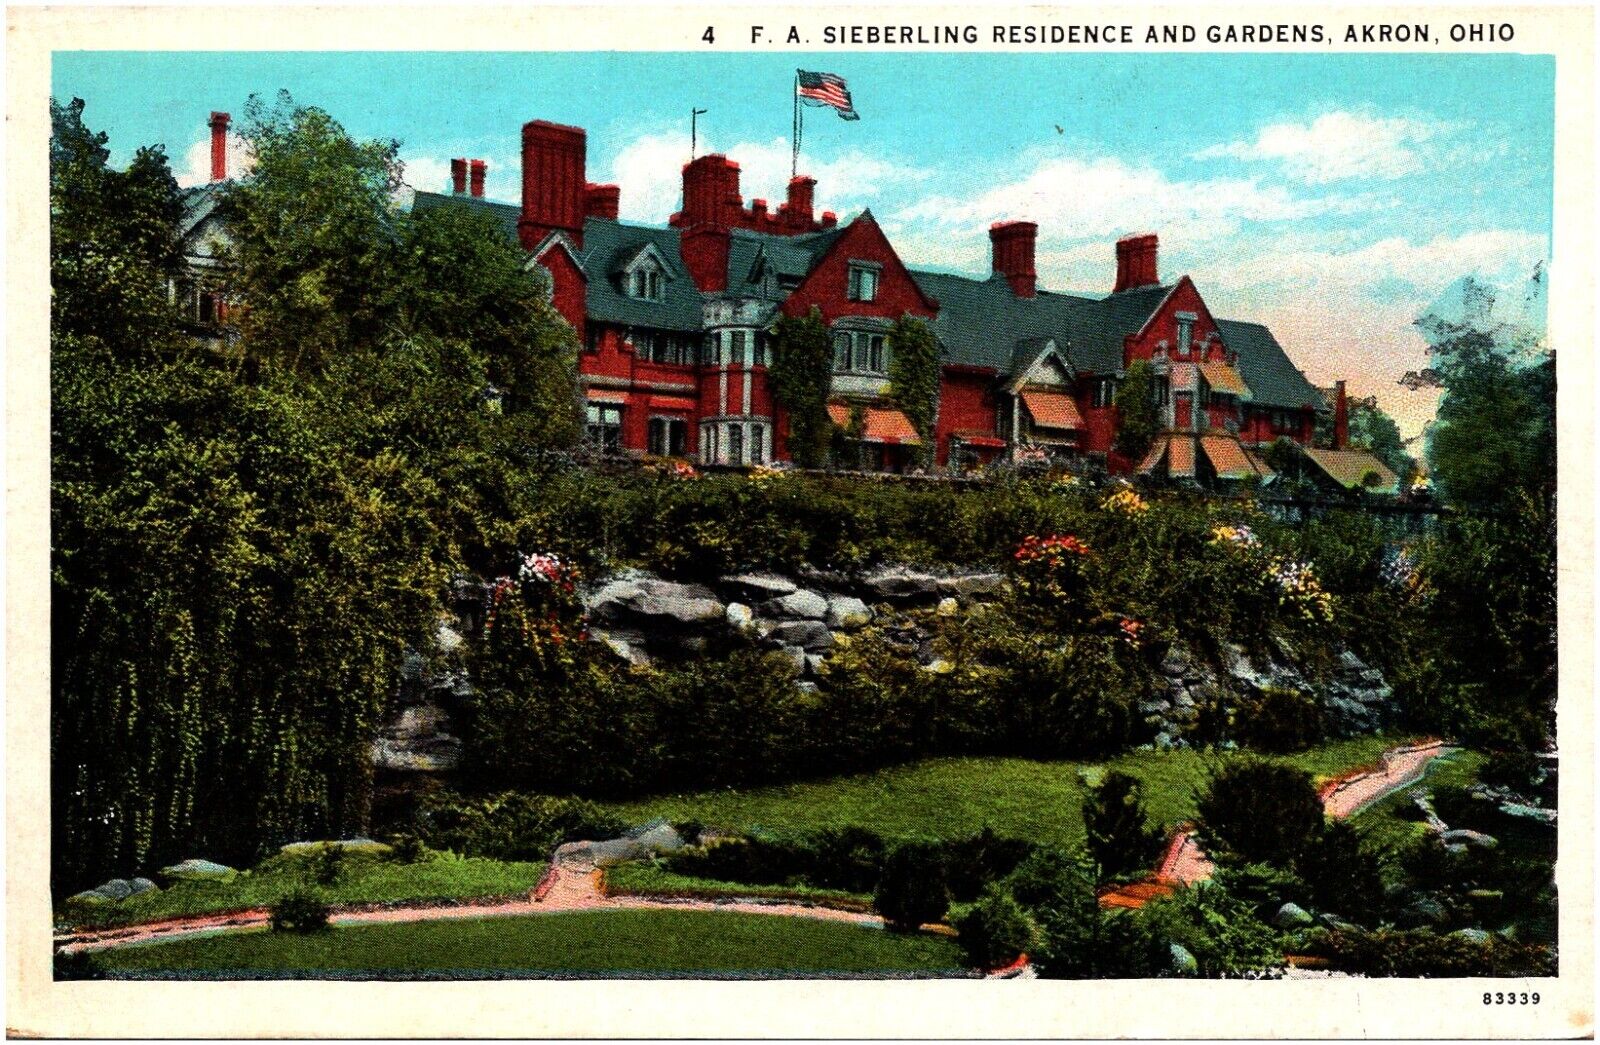 F.A. Sieberling Residence and Gardens Akron Ohio OH 1920s Postcard Unused